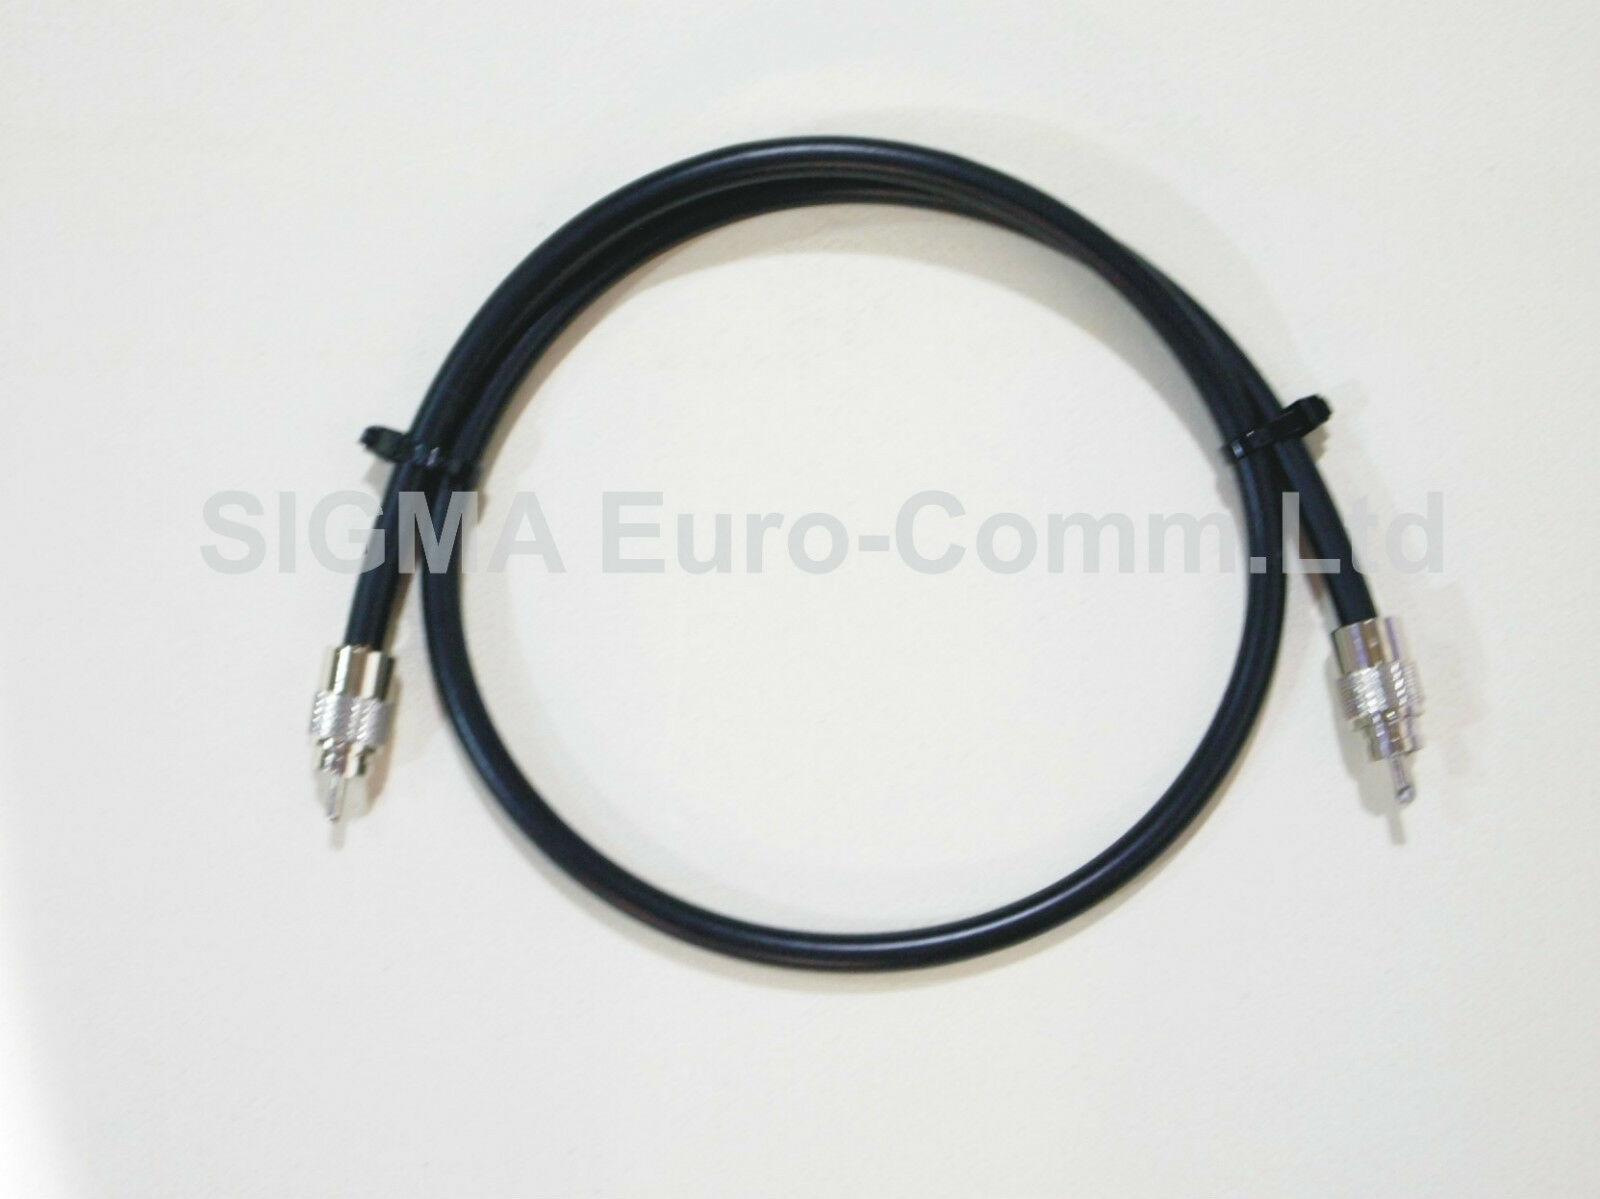 Sigma RG213 Patch lead 1m with 2 quality PL259 Connectors High Power CB Ham radio use